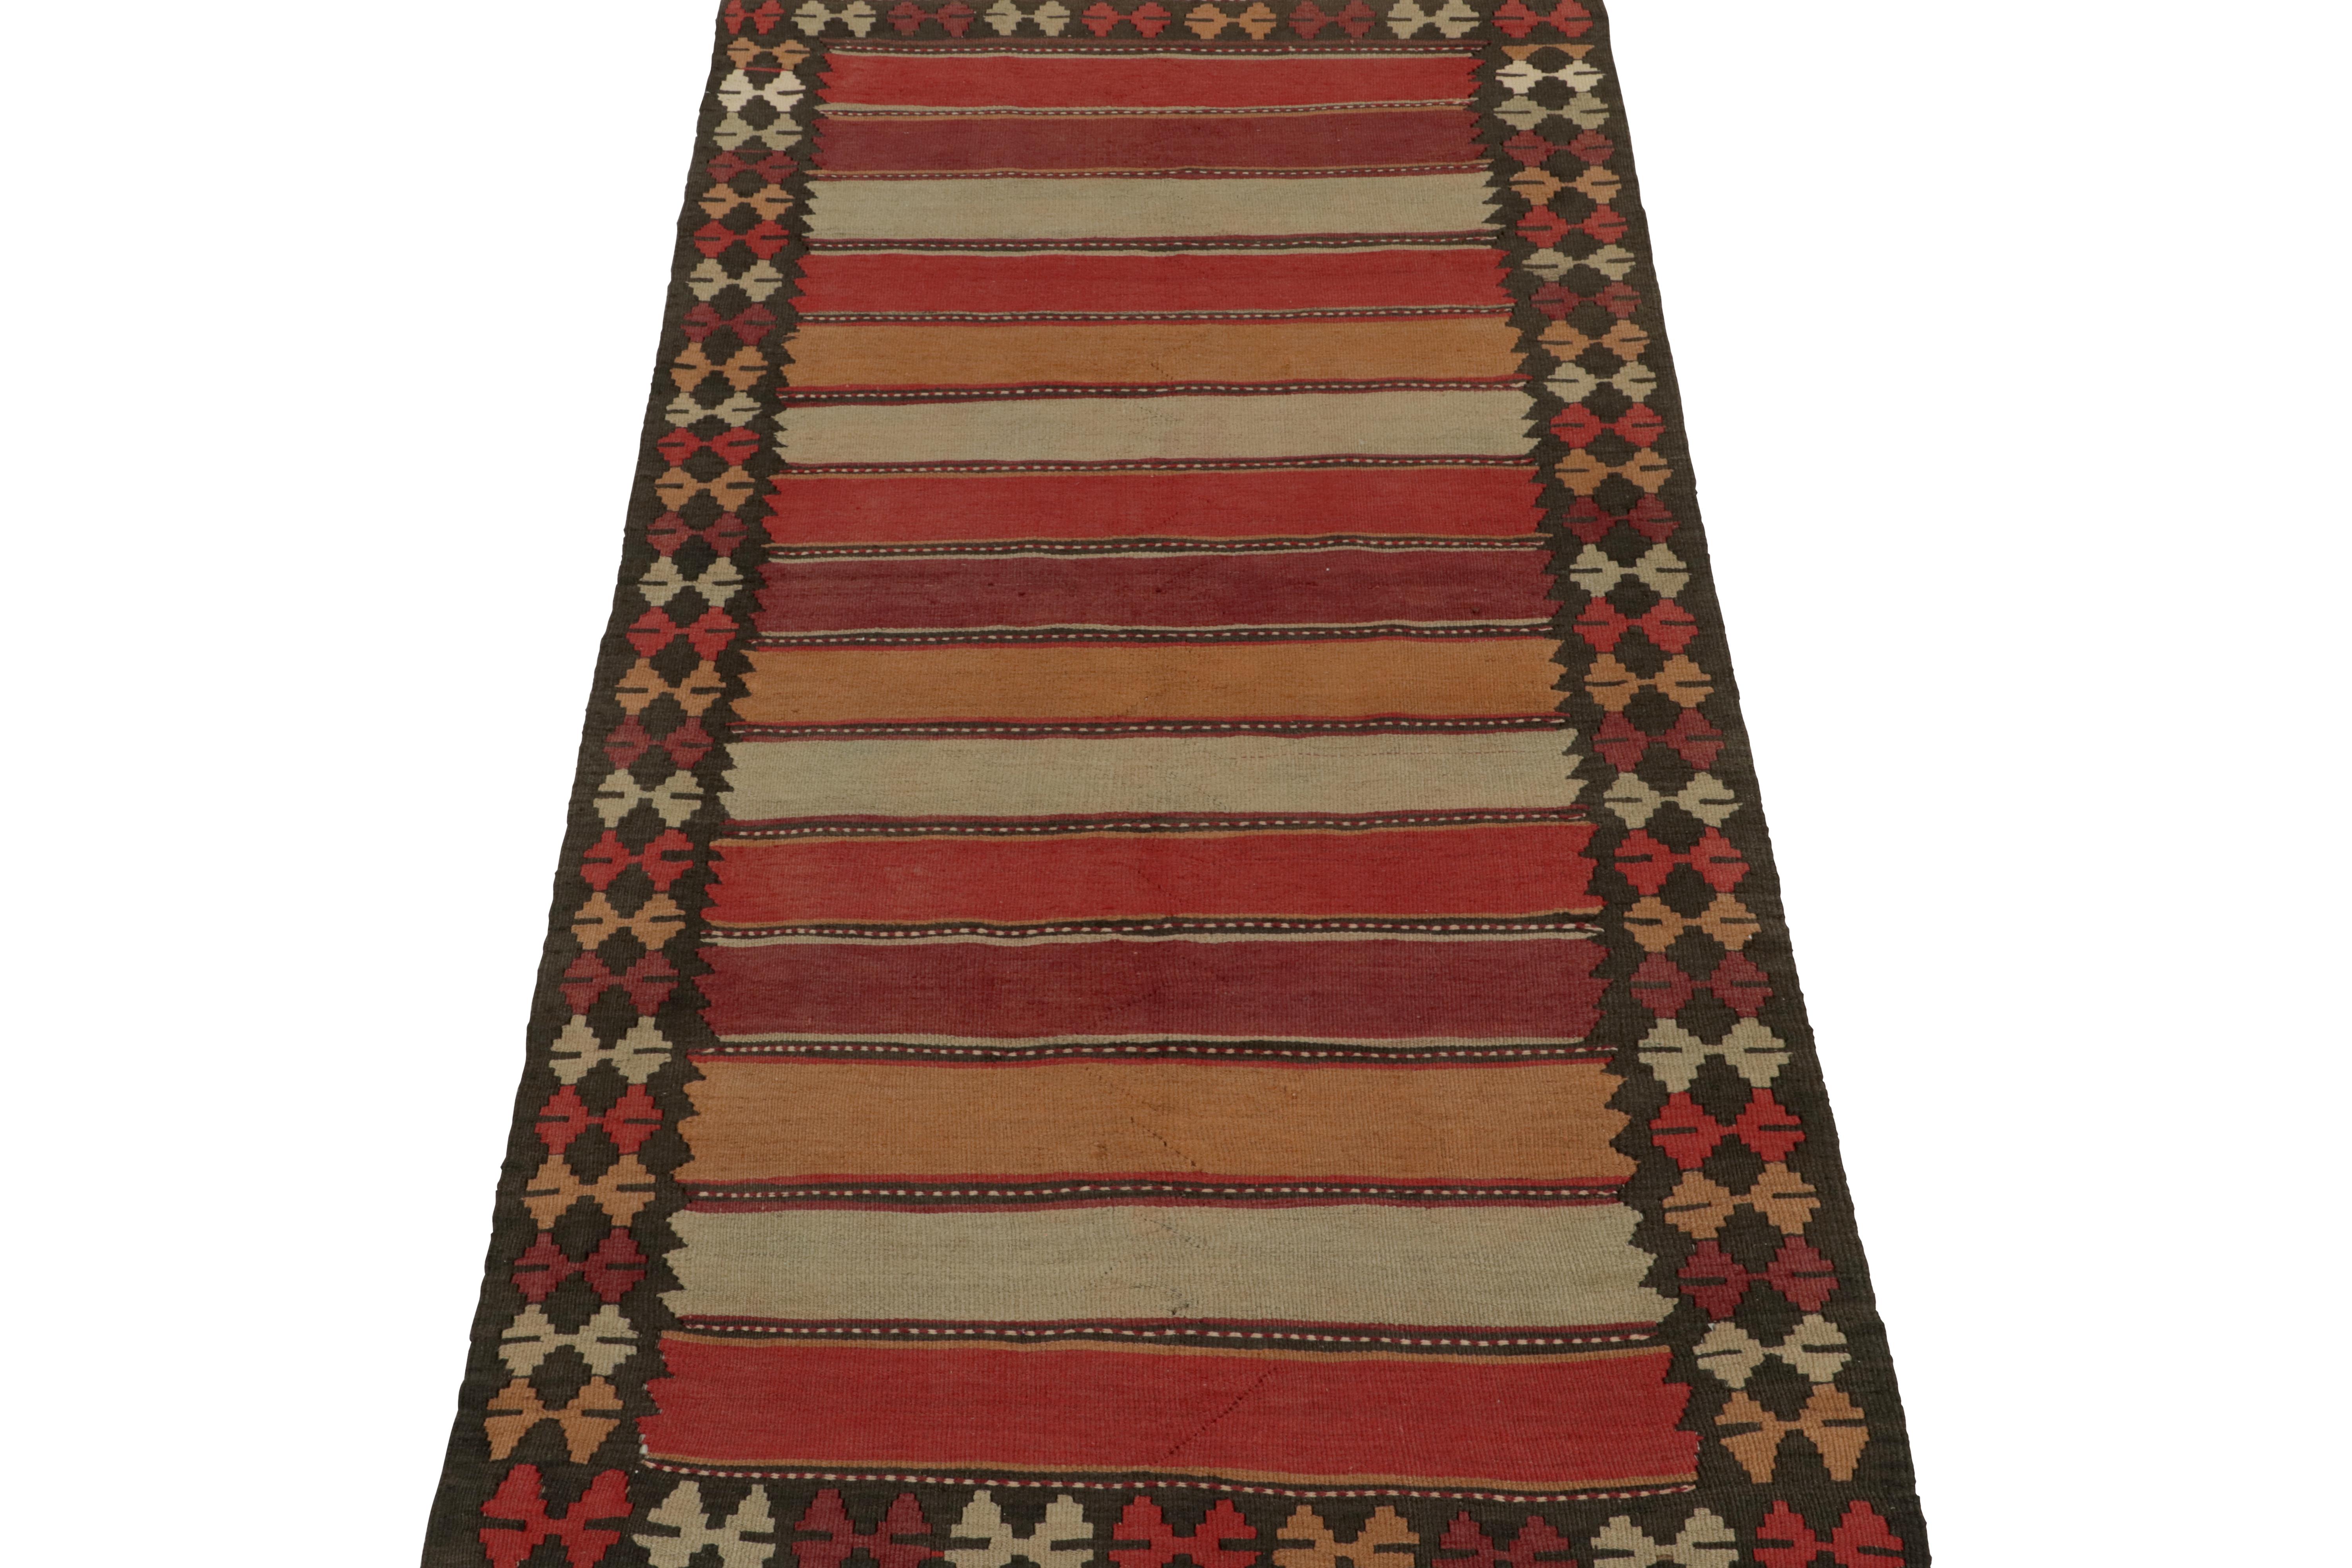 This vintage 5x10 Persian Kilim is a tribal rug from Meshkin—a small northwestern village known for its fabulous long rugs like this gallery rug. Handwoven in wool, it originates circa 1950-1960.

Further on the Design:

This design uses